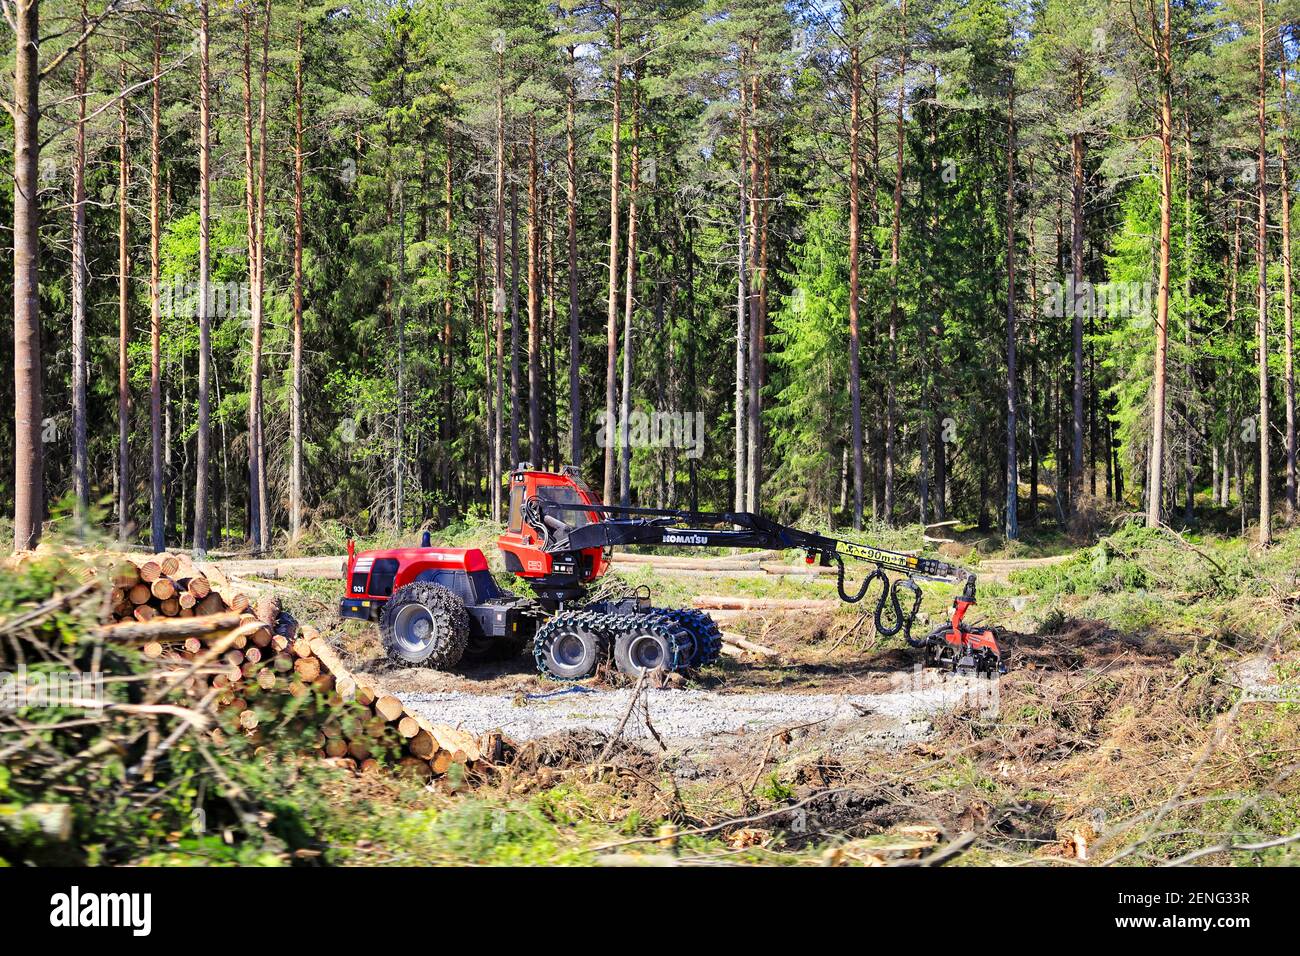 Komatsu 931 forest harvester on logging site in coniferous forest on a sunny day of early summer. South of Finland, June 3, 2017. Stock Photo